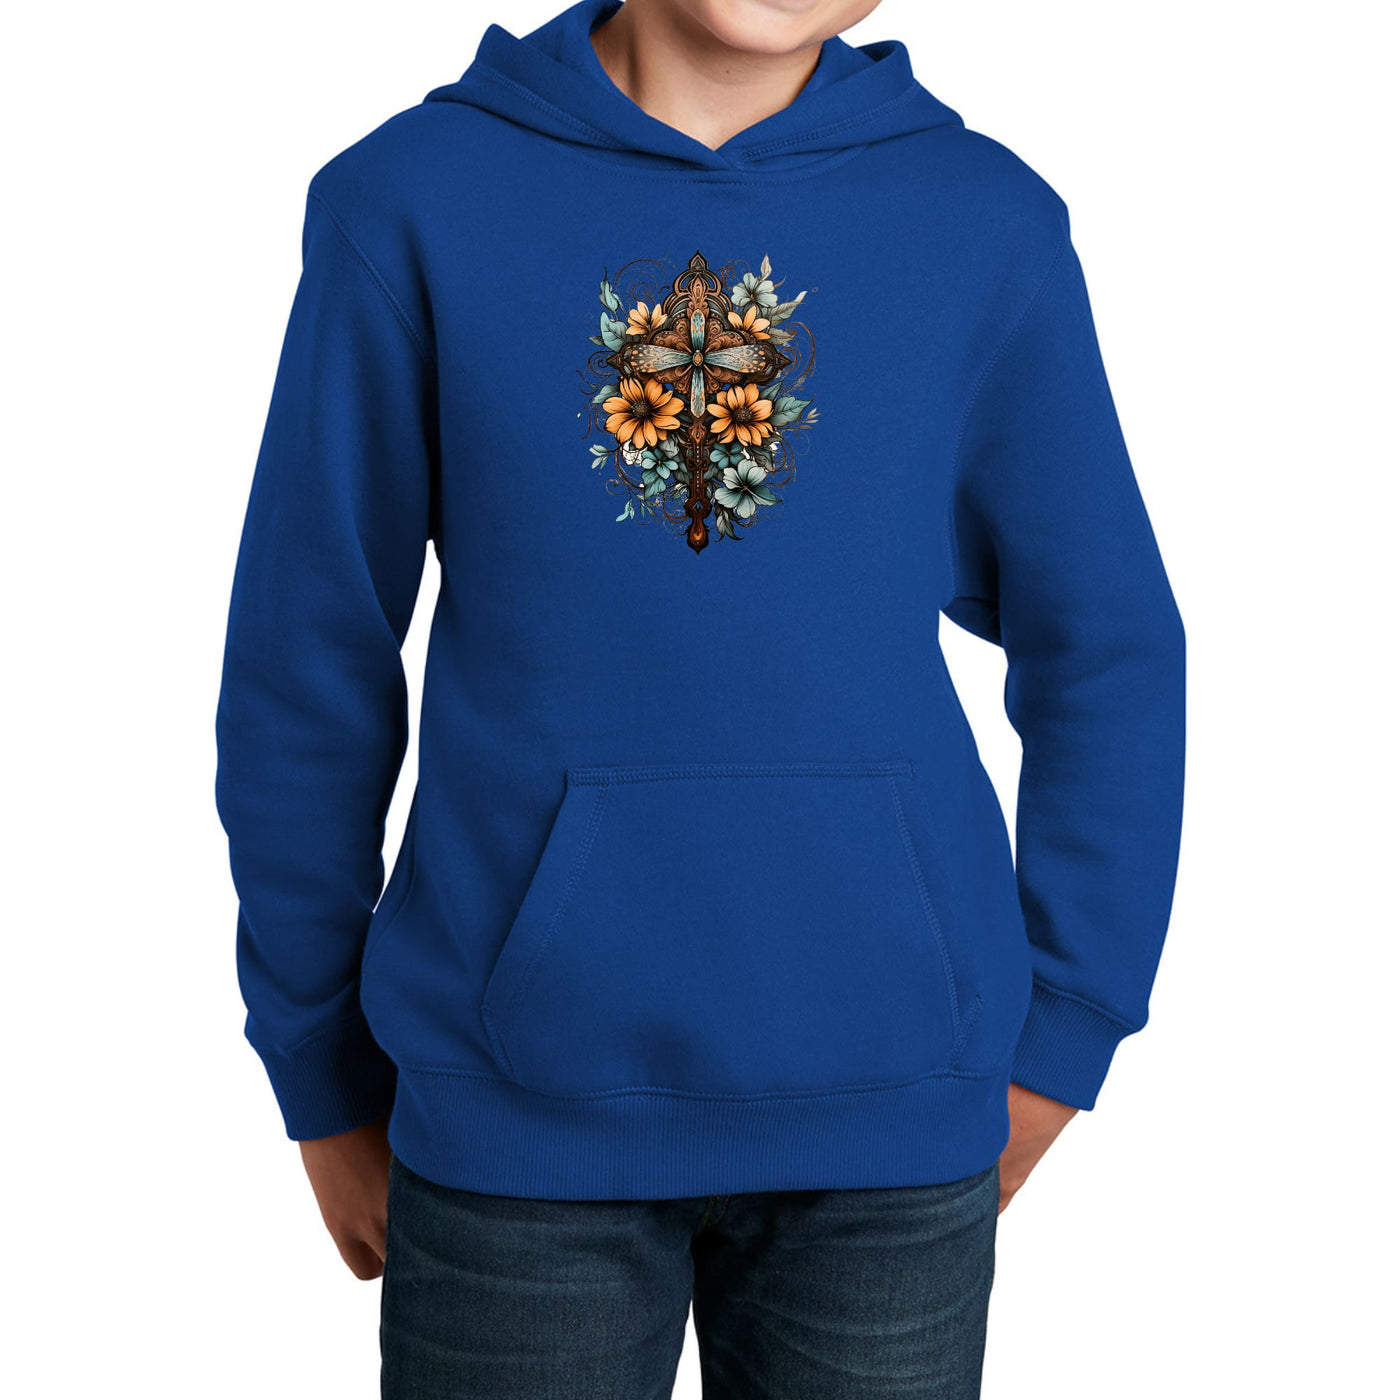 Youth Long Sleeve Hoodie Christian Cross Floral Bouquet Brown And Blue - Youth